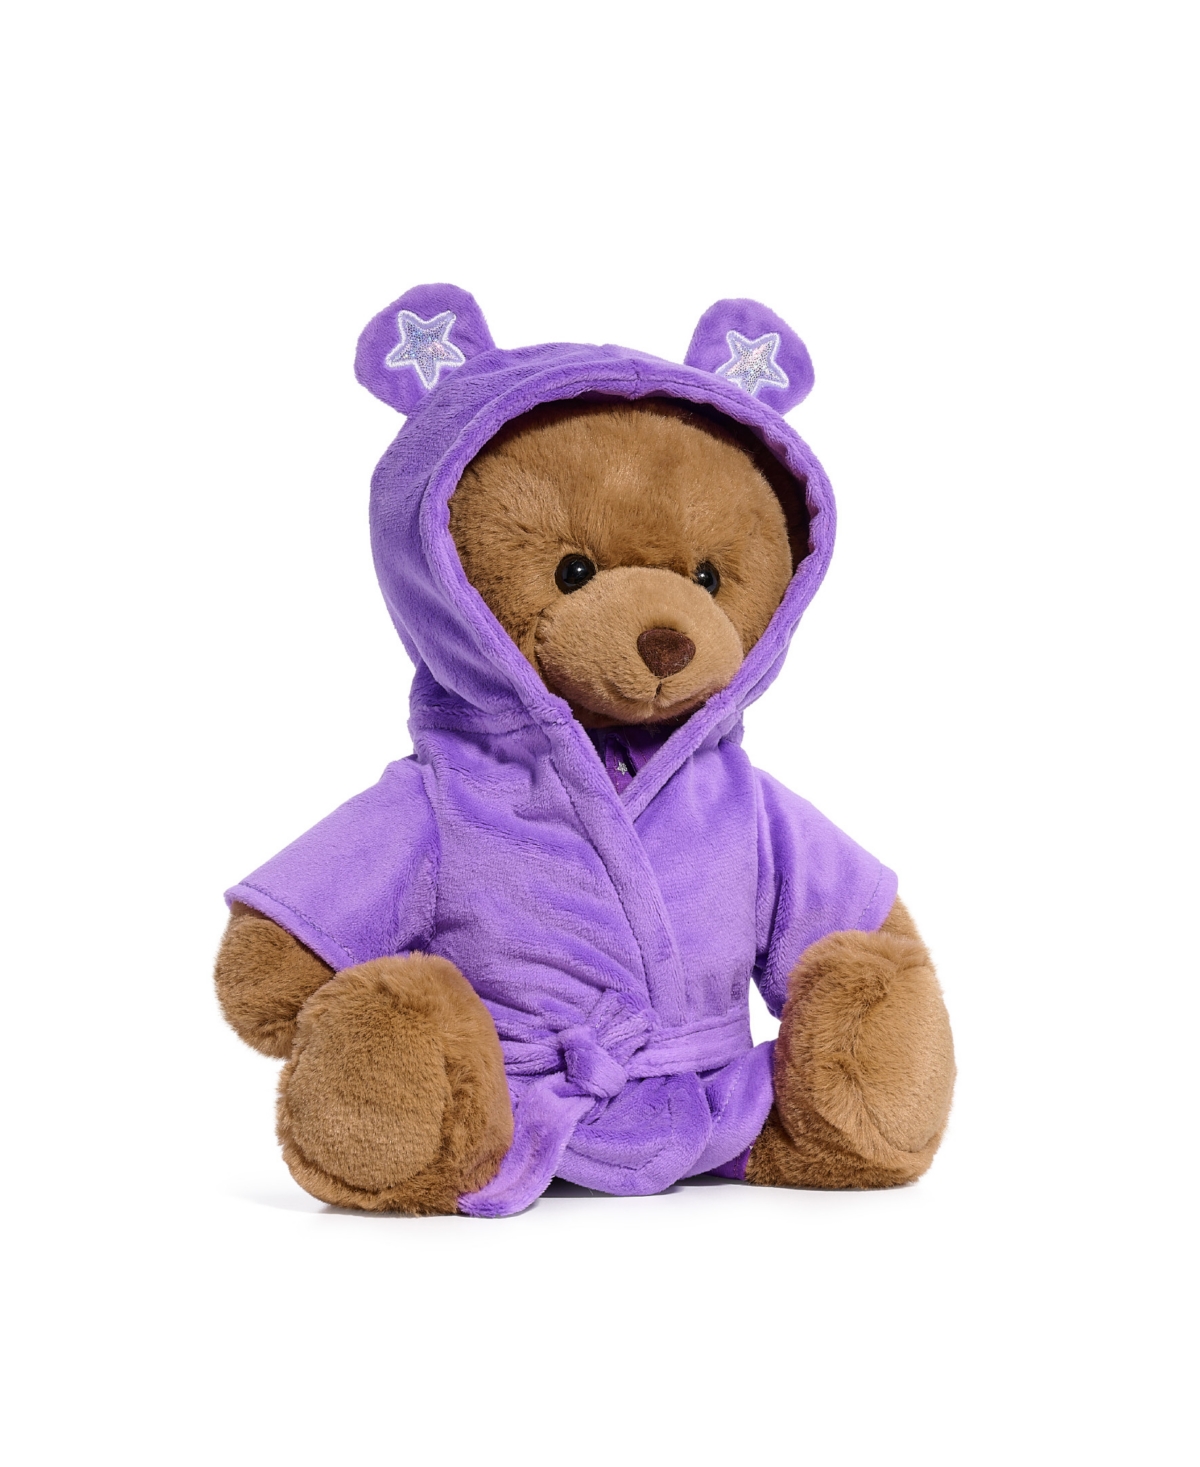 Geoffrey's Toy Box 9.5" Toy Plush Teddy Bear With Robe, Created For Macys In Pink